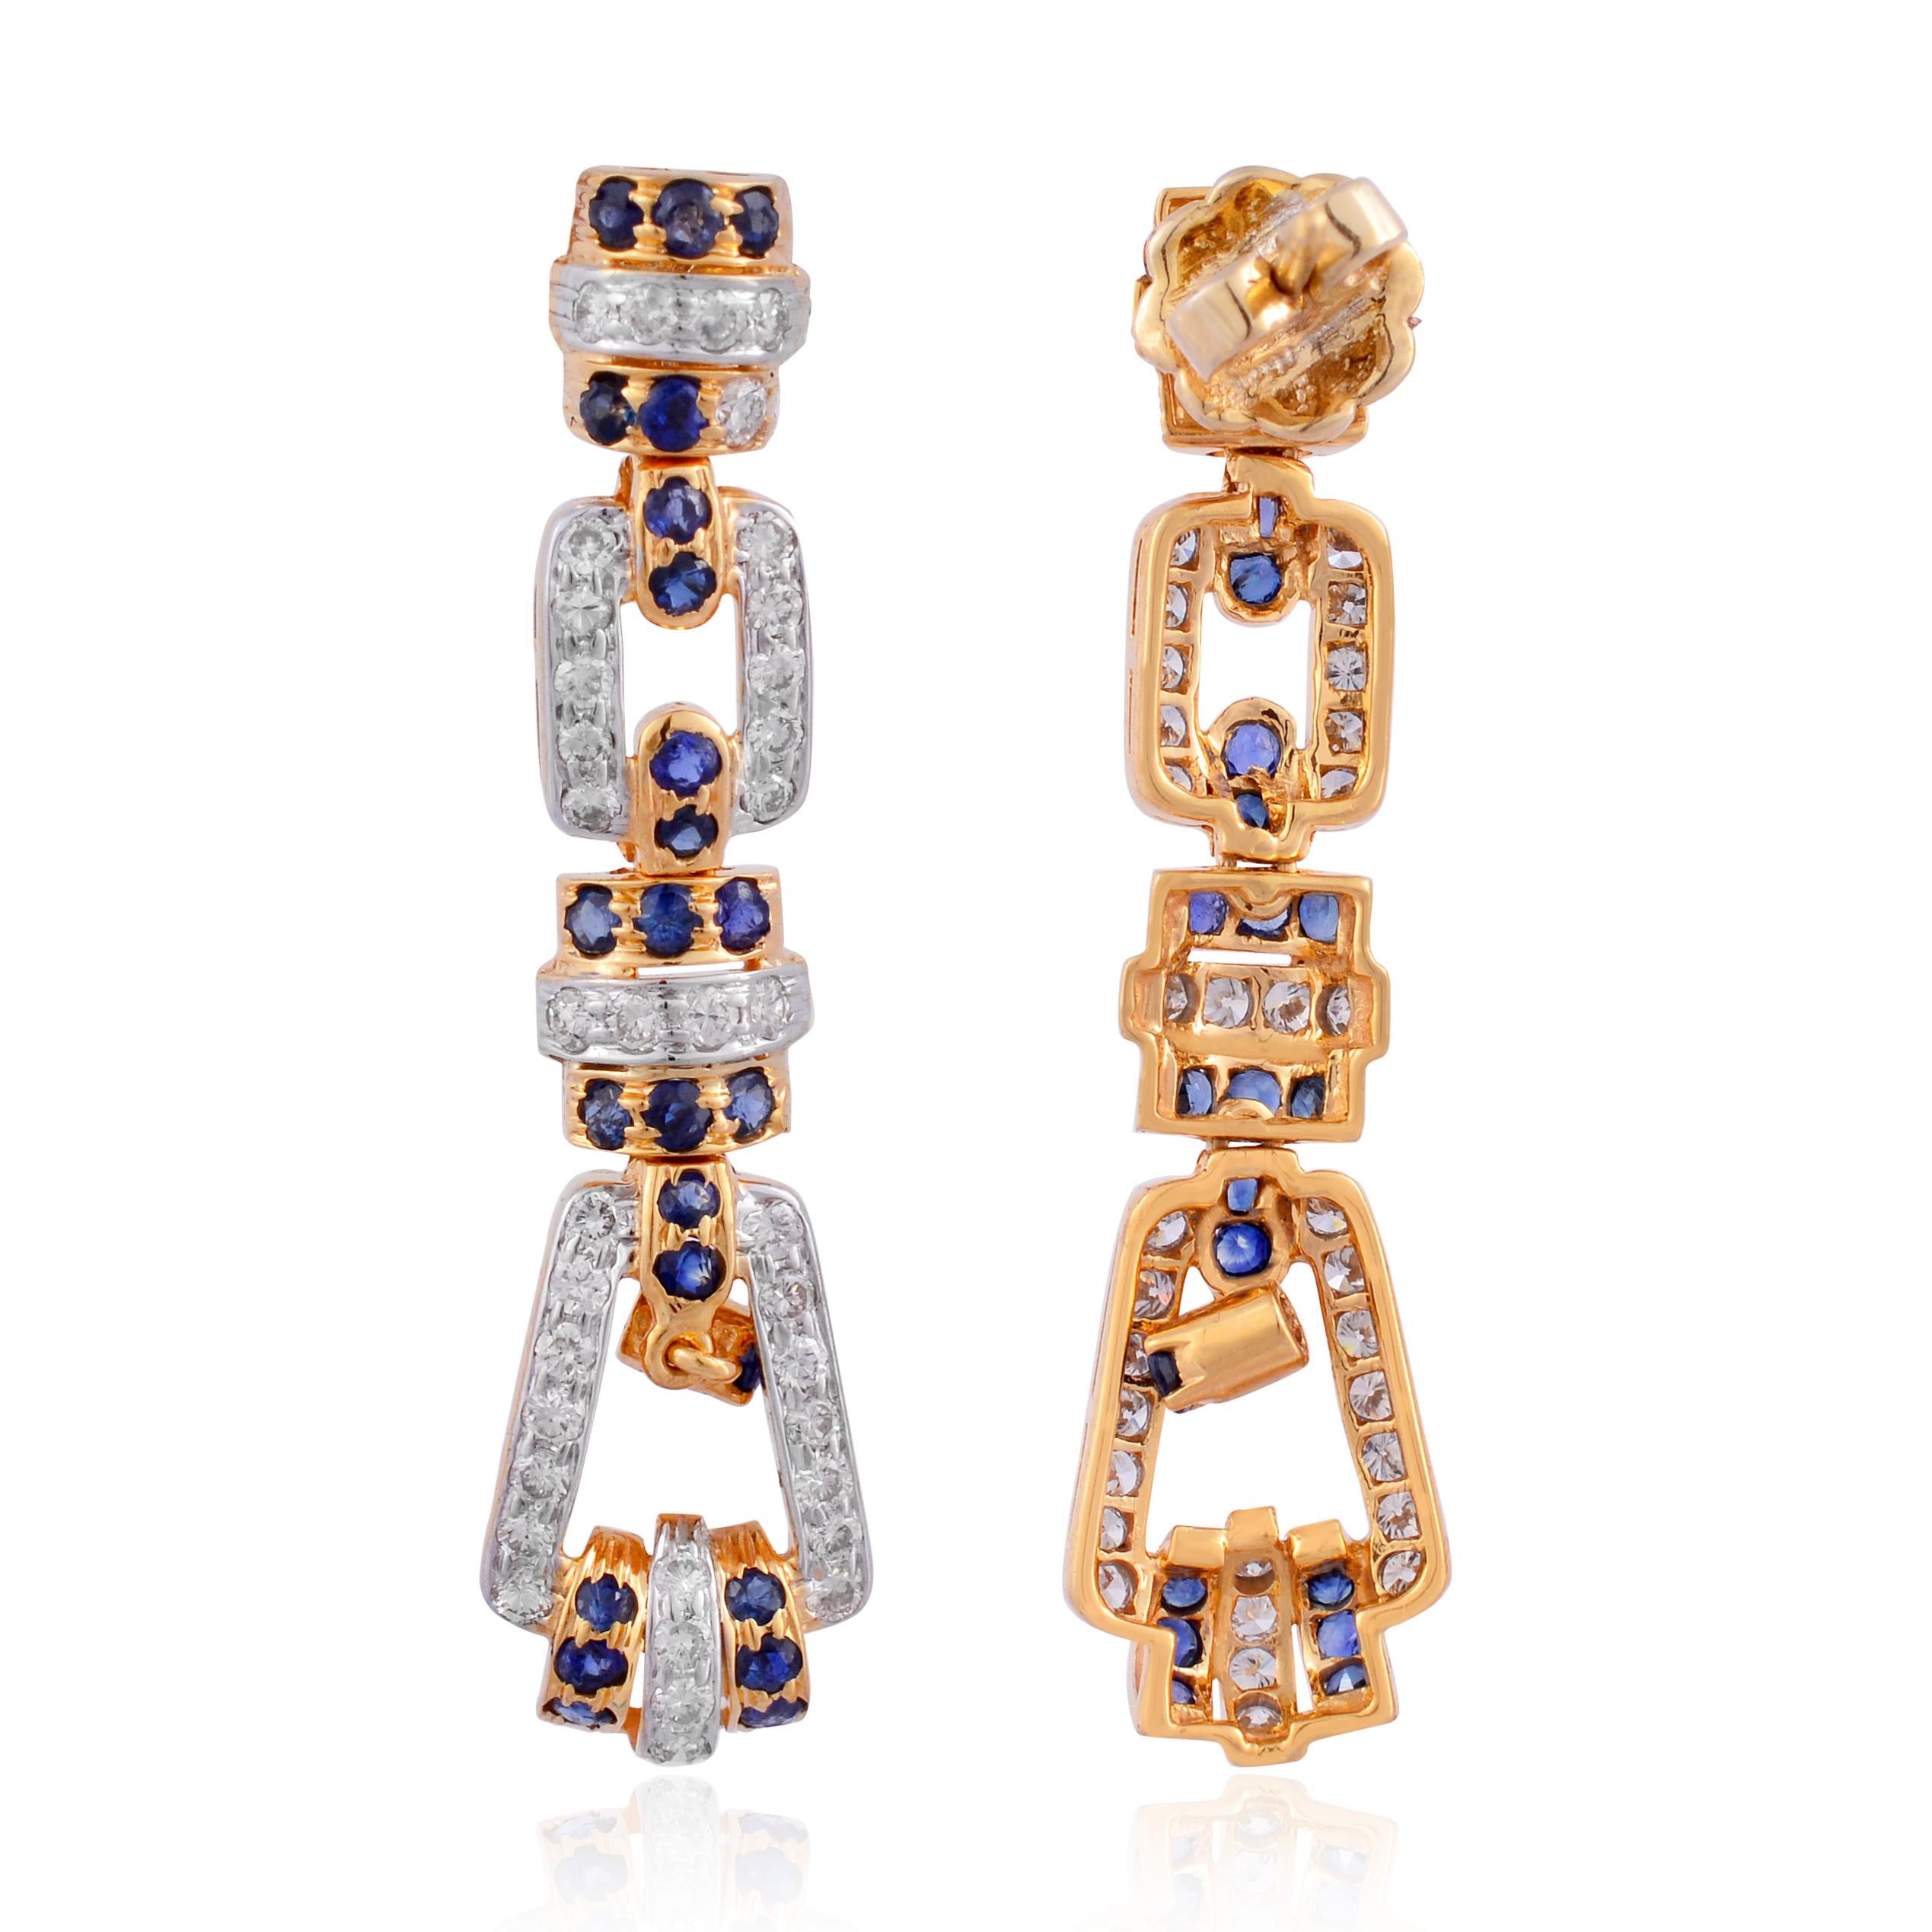 Code :- CN-16541A
Gross Wt. :- 6.68 gram
18k Yellow Gold Wt. :- 6.43 gram
Diamond Wt. :- 0.65 Ct.
Blue Sapphire Wt. :- 0.60 Ct.
Earrings Size :- 39 x 10 mm
✦ Sizing
.....................
We can adjust most items to fit your sizing preferences. Most